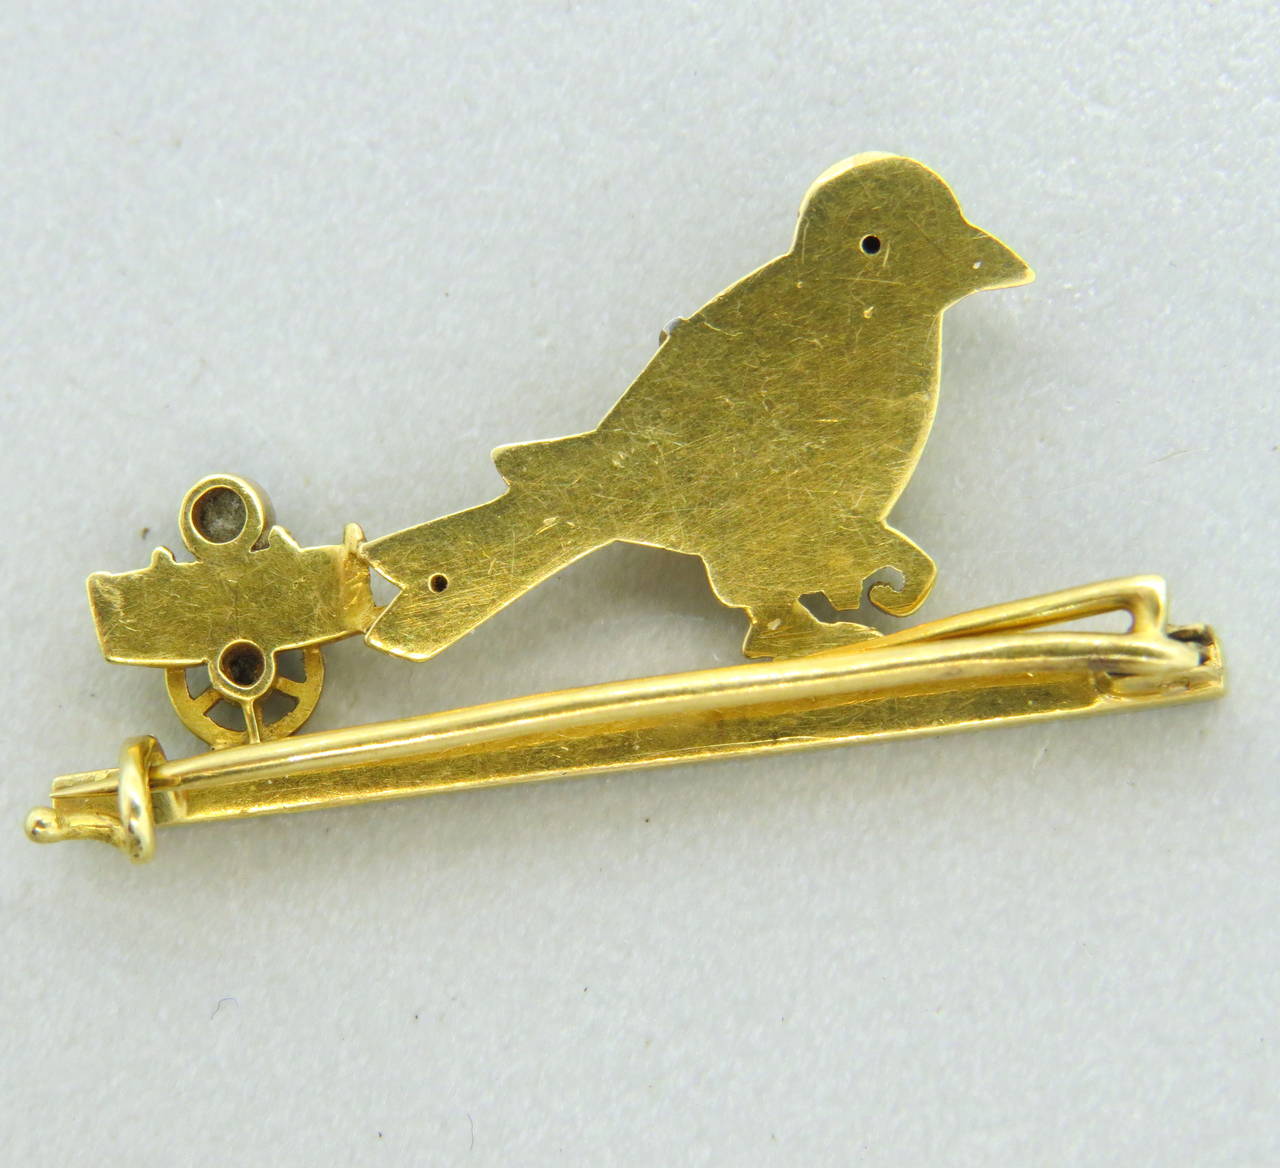 Antique bird brooch, crafted in 18k gold and platinum, decorated with rose cut diamonds. Brooch measures 35mm x 17mm. Weight of the piece - 4.8 grams